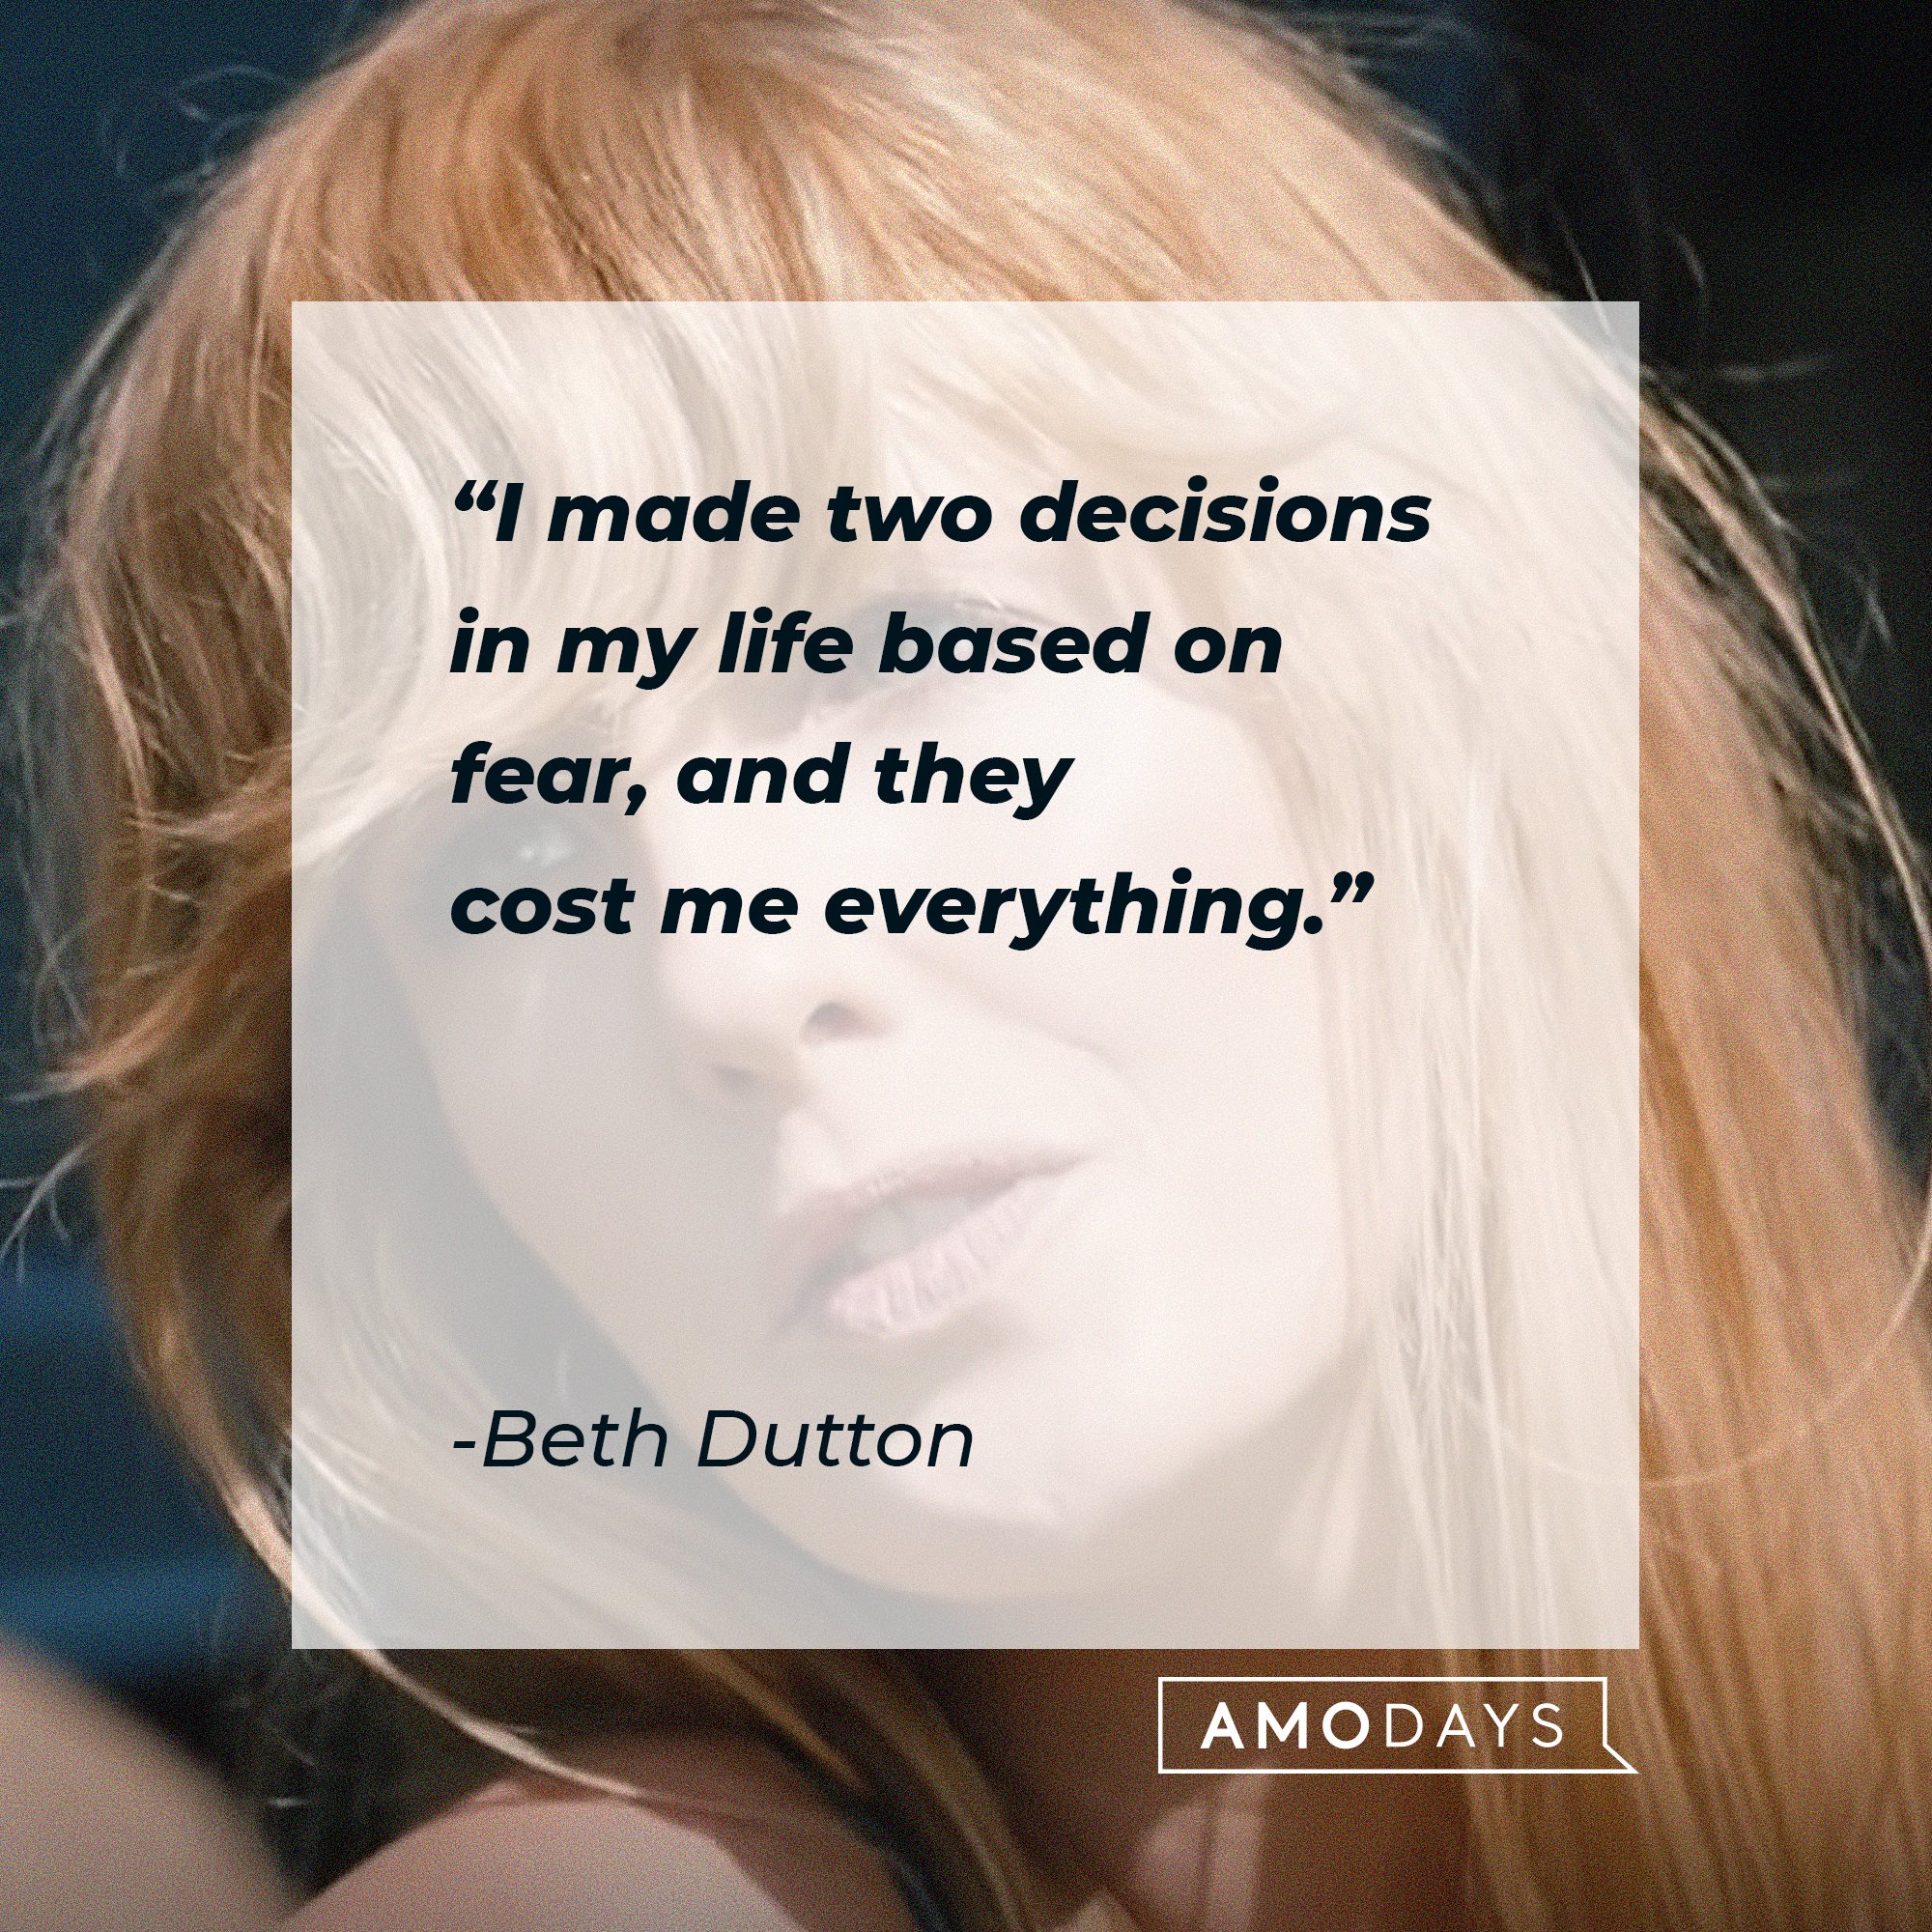  Beth Dutton's quote: "I made two decisions in my life based on fear, and they cost me everything." | Source: AmoDays